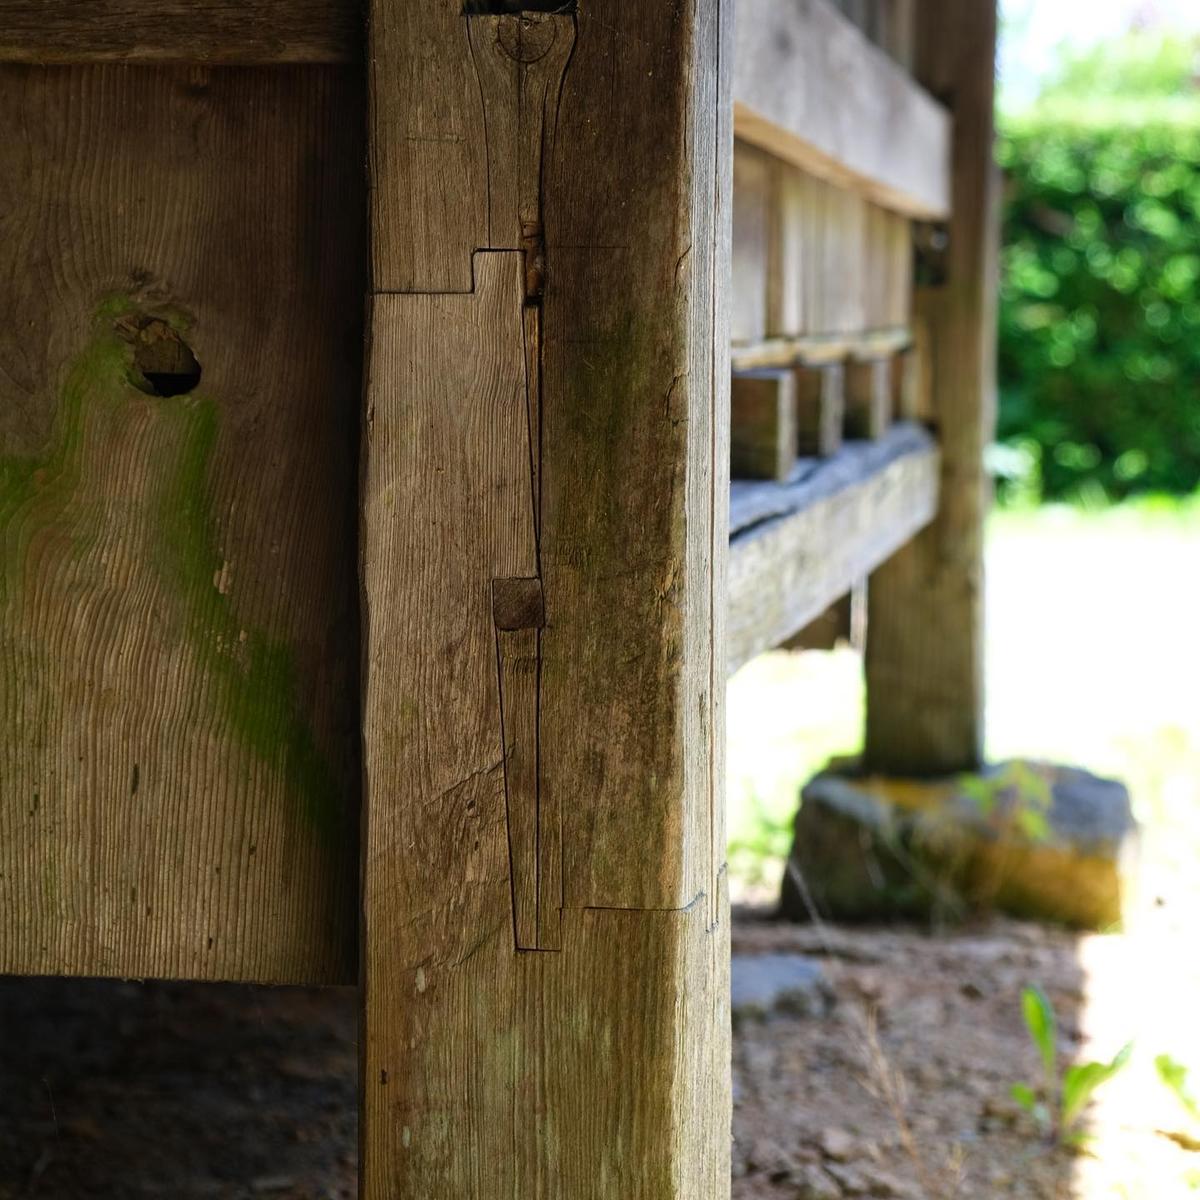 Iwanuki enjoys spotting traditional Japanese joinery during his trips, such as this "kanawa tsugi" that was almost invisible to the eye. (Courtesy of <a href="https://www.youtube.com/@dylaniwakuni">Dylan Iwanuki</a>)